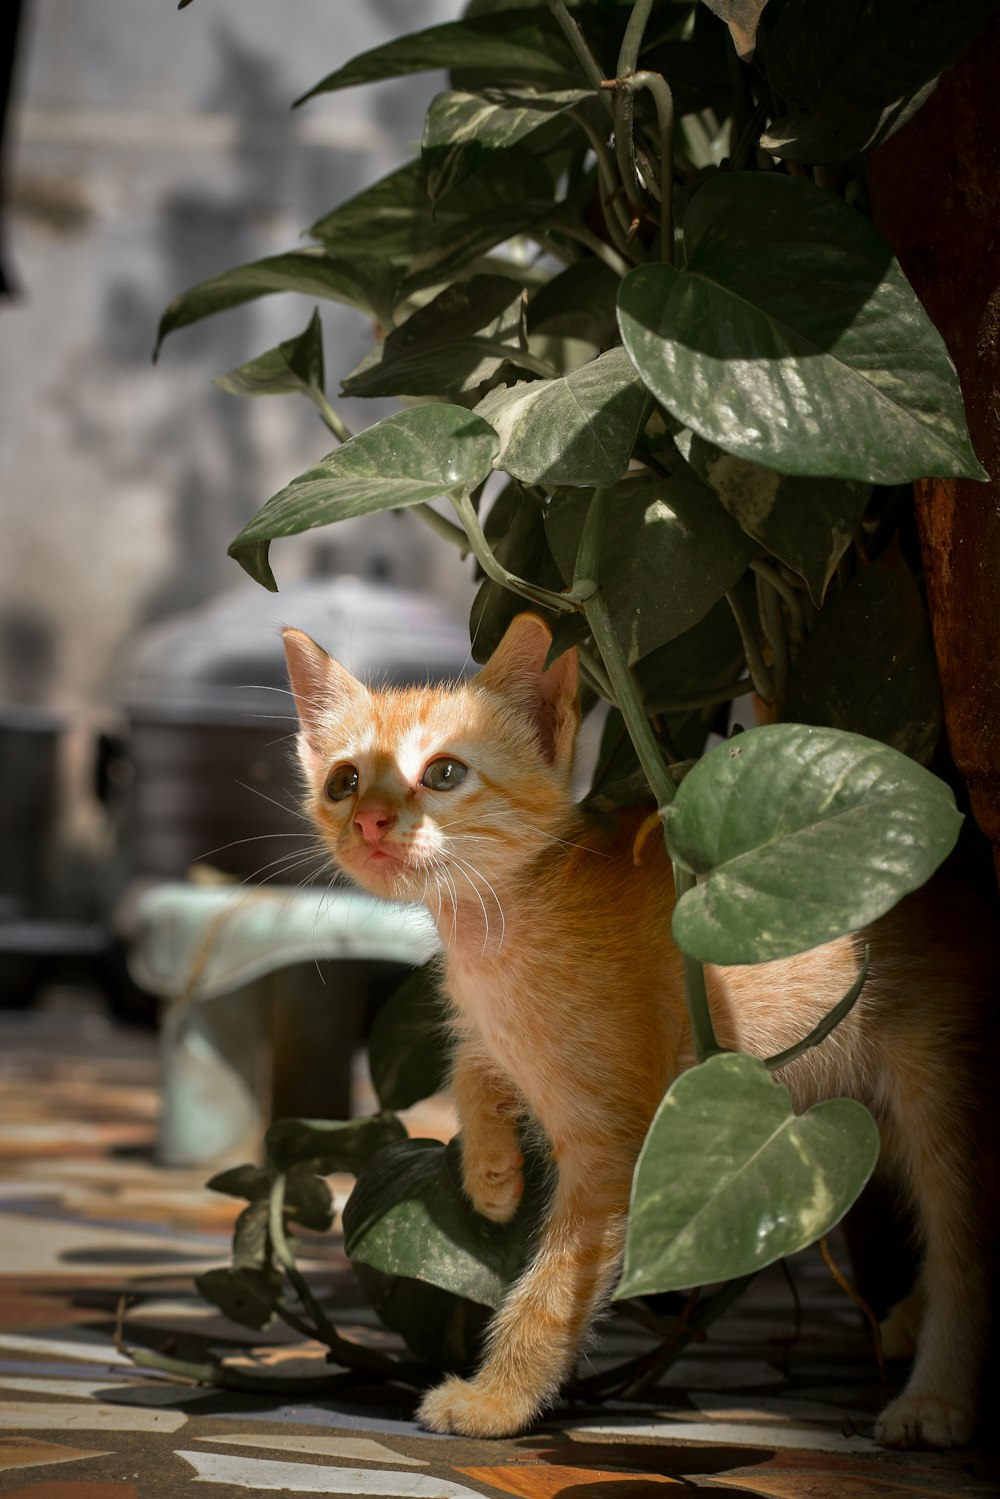 a small orange cat standing next to a green plant